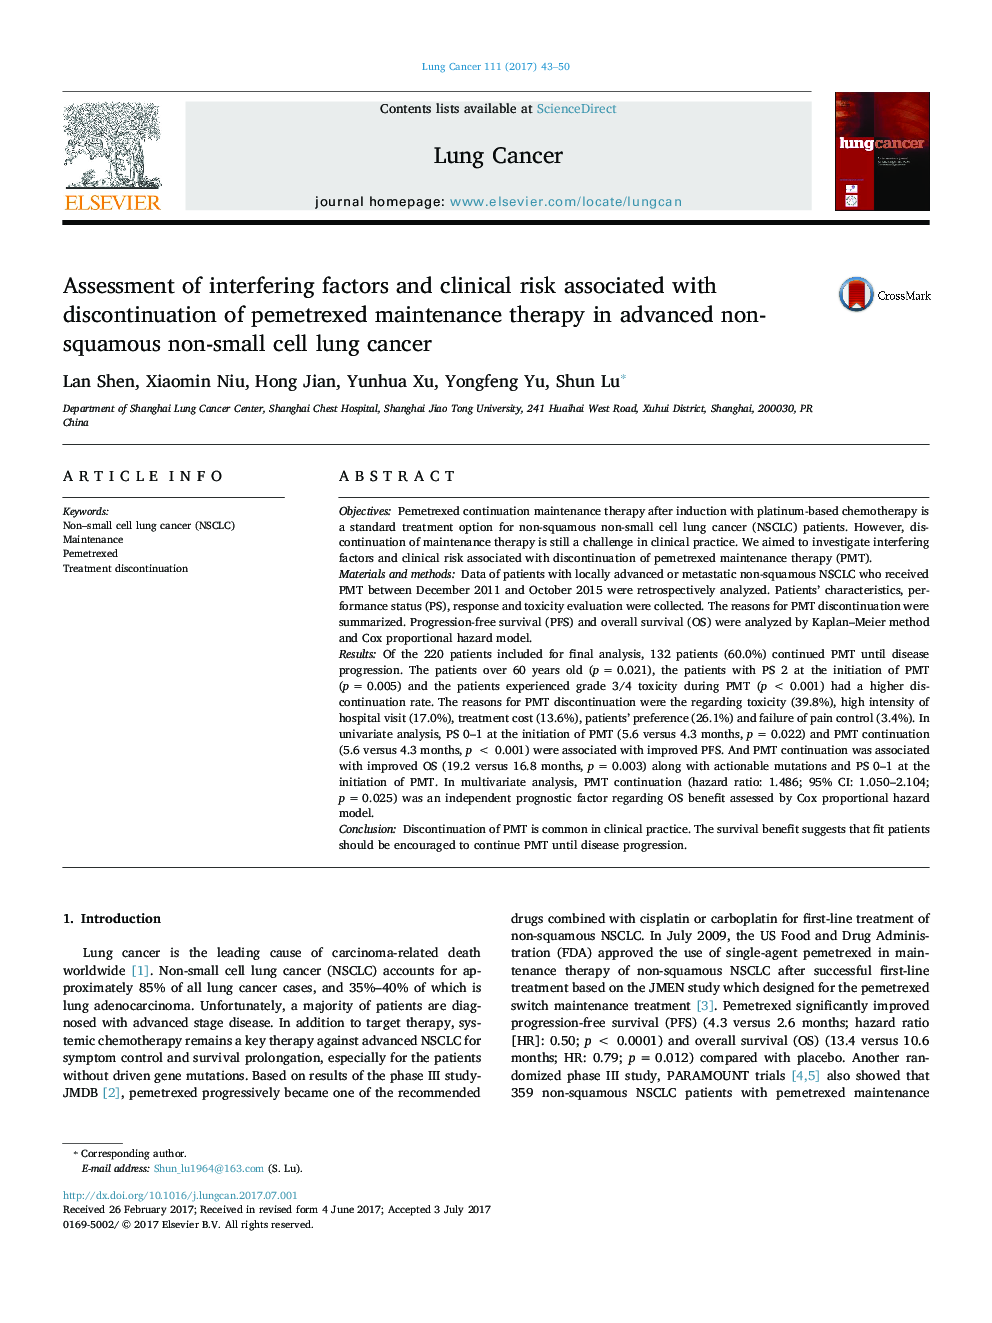 Assessment of interfering factors and clinical risk associated with discontinuation of pemetrexed maintenance therapy in advanced non-squamous non-small cell lung cancer